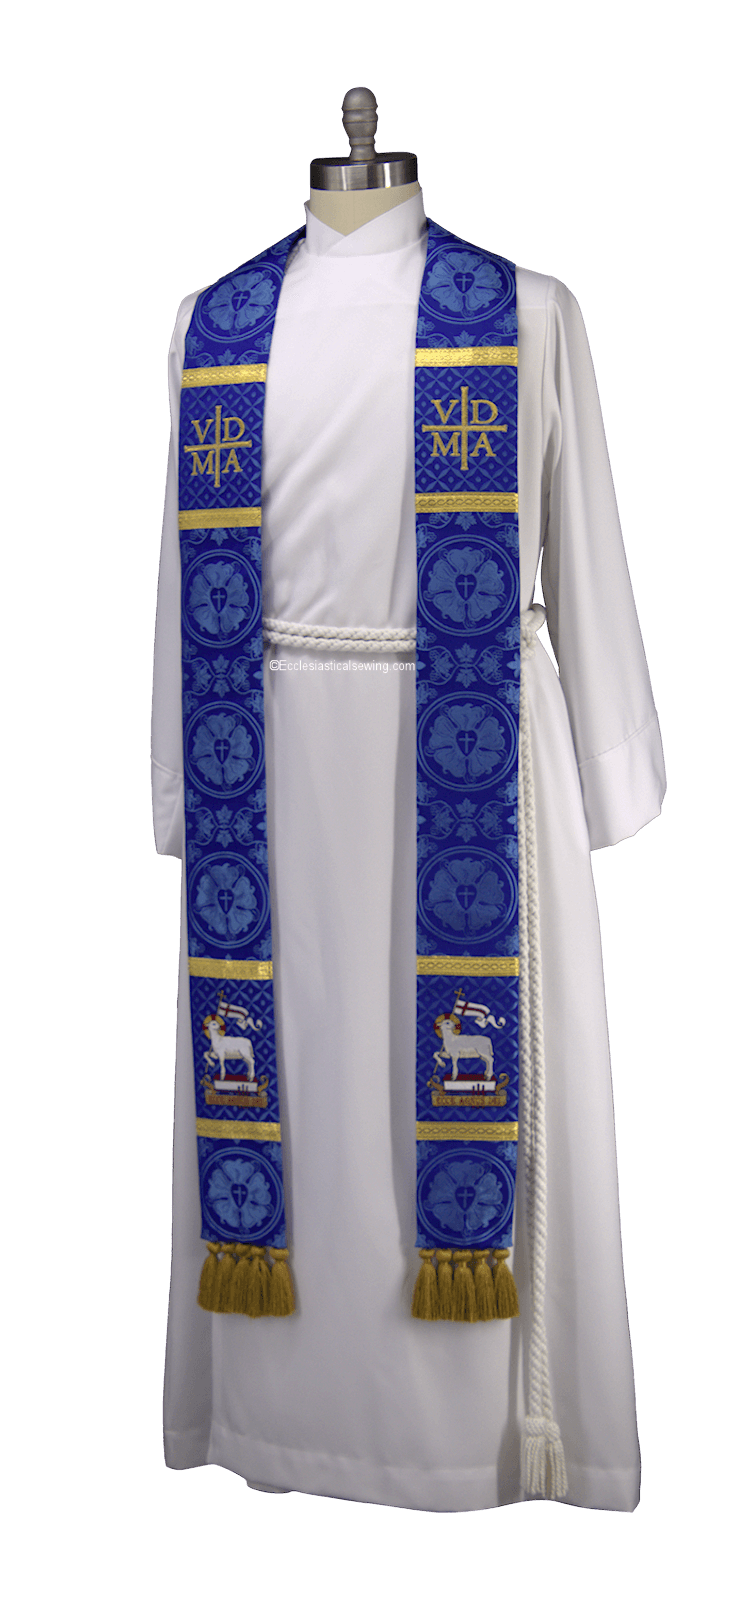 files/ecce-agnus-dei-advent-pastor-priest-stole-or-blue-or-violet-stole-ecclesiastical-sewing-2-31790325989632.png